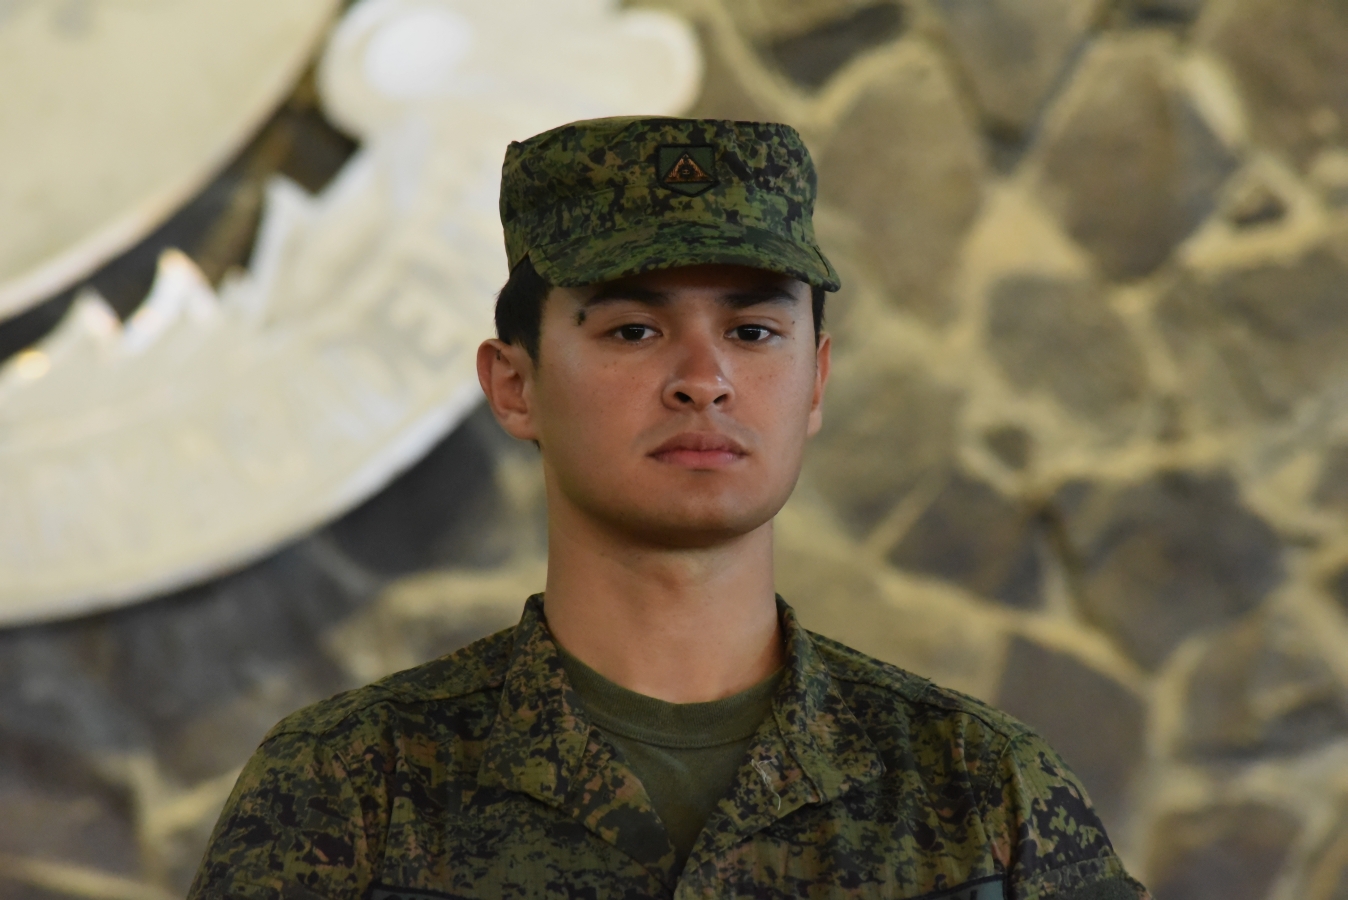 Actor Matteo Guidicelli promoted to Army 2nd lieutenant at PMA